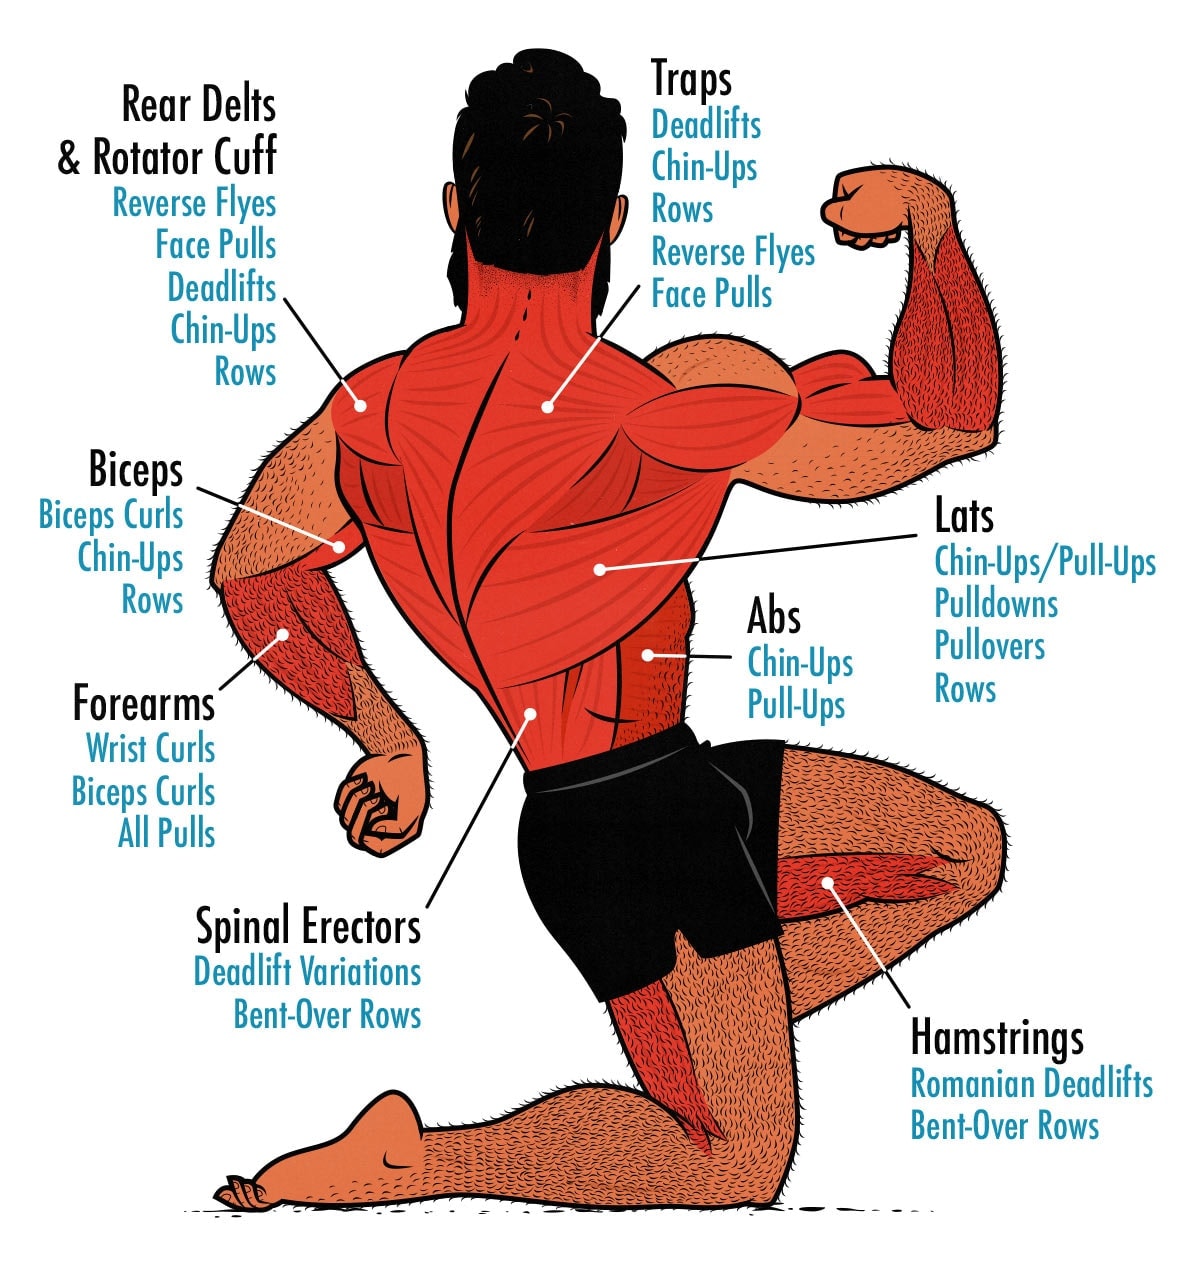 Diagram showing the muscles worked during a Back Day workout routine.